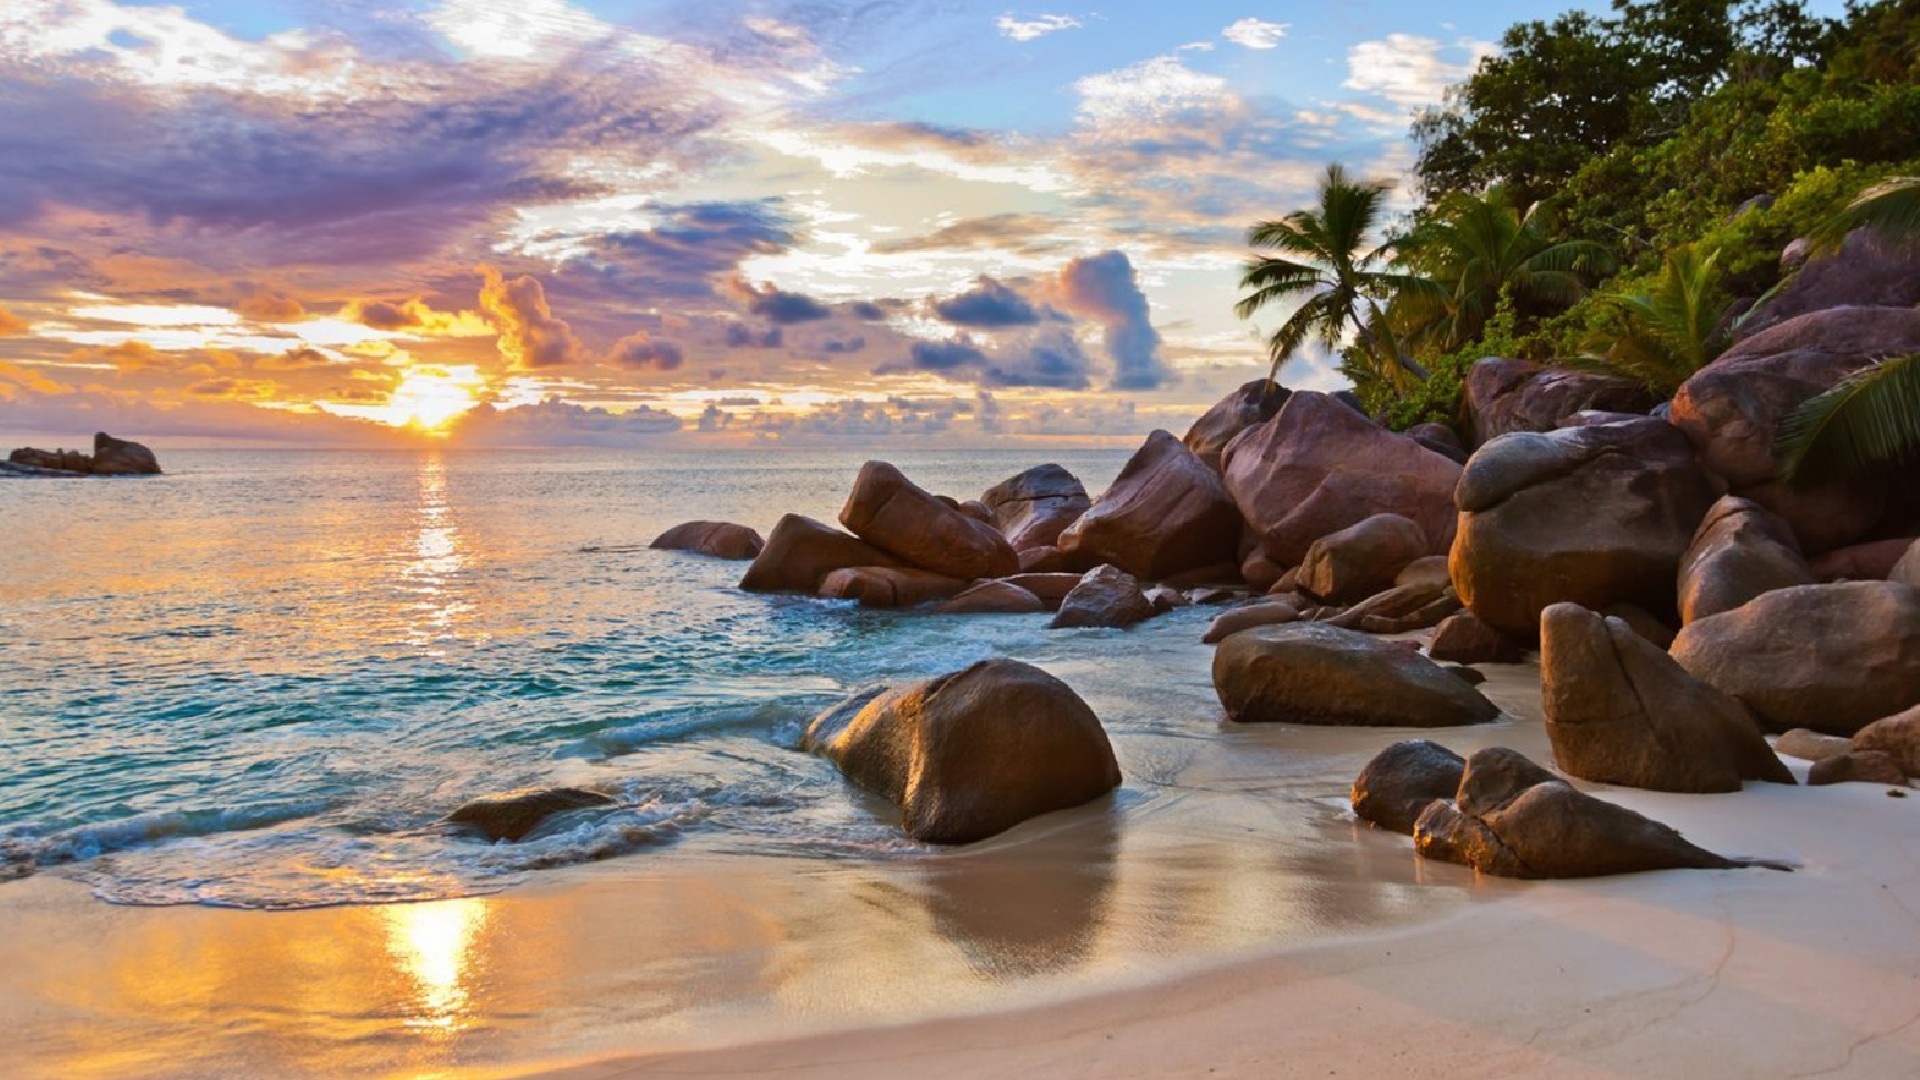 Travel update:  Seychelles Islands is now open for tourism